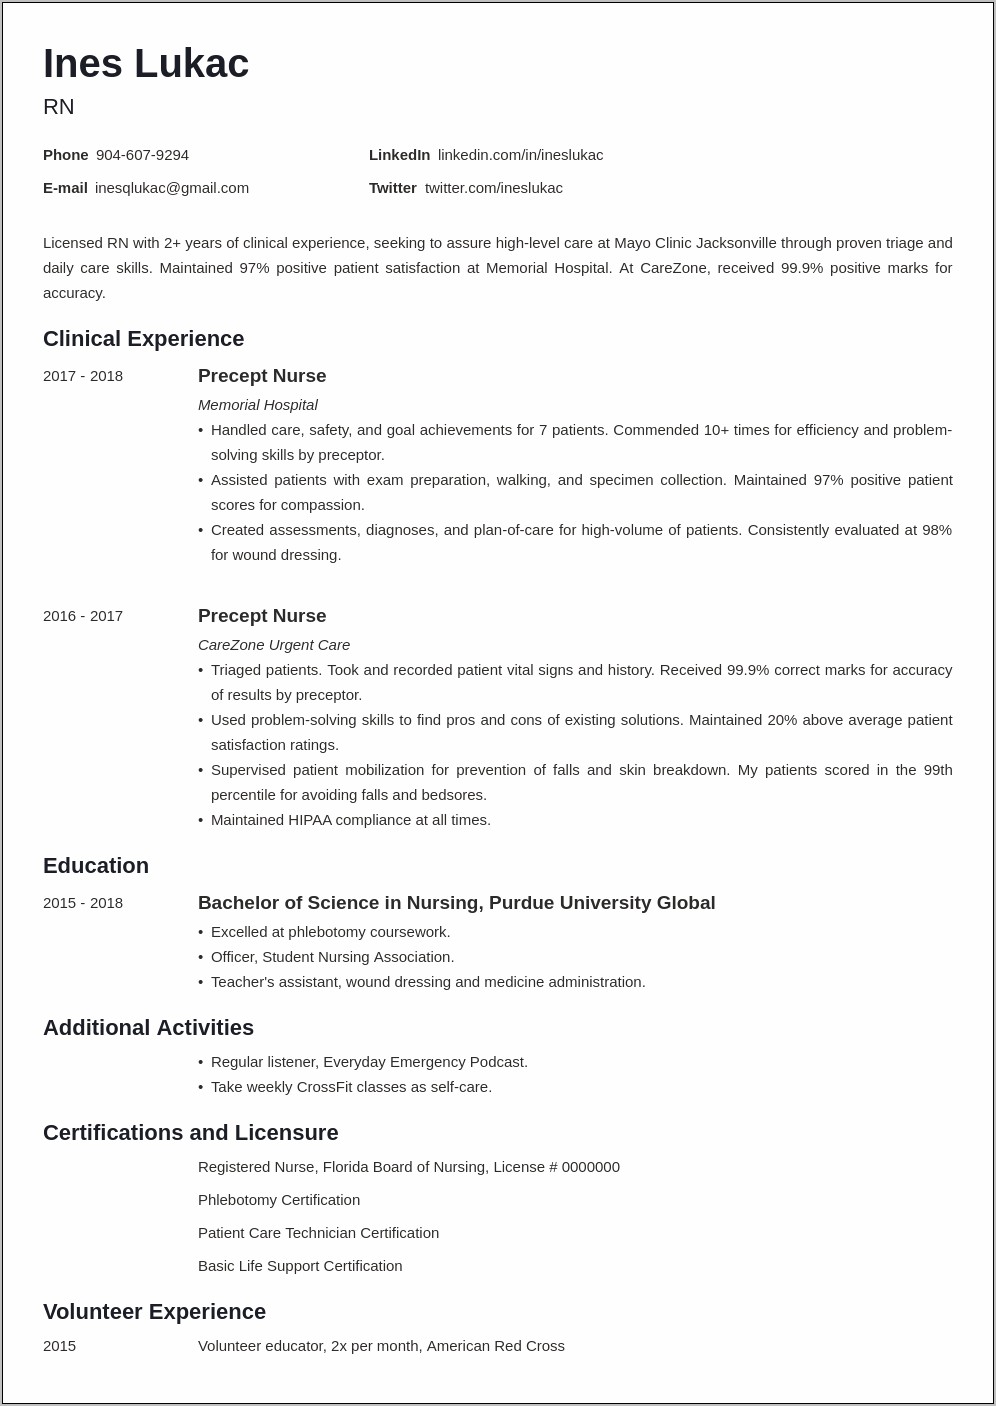 Sample Resume For Nurses With Hospital Experience